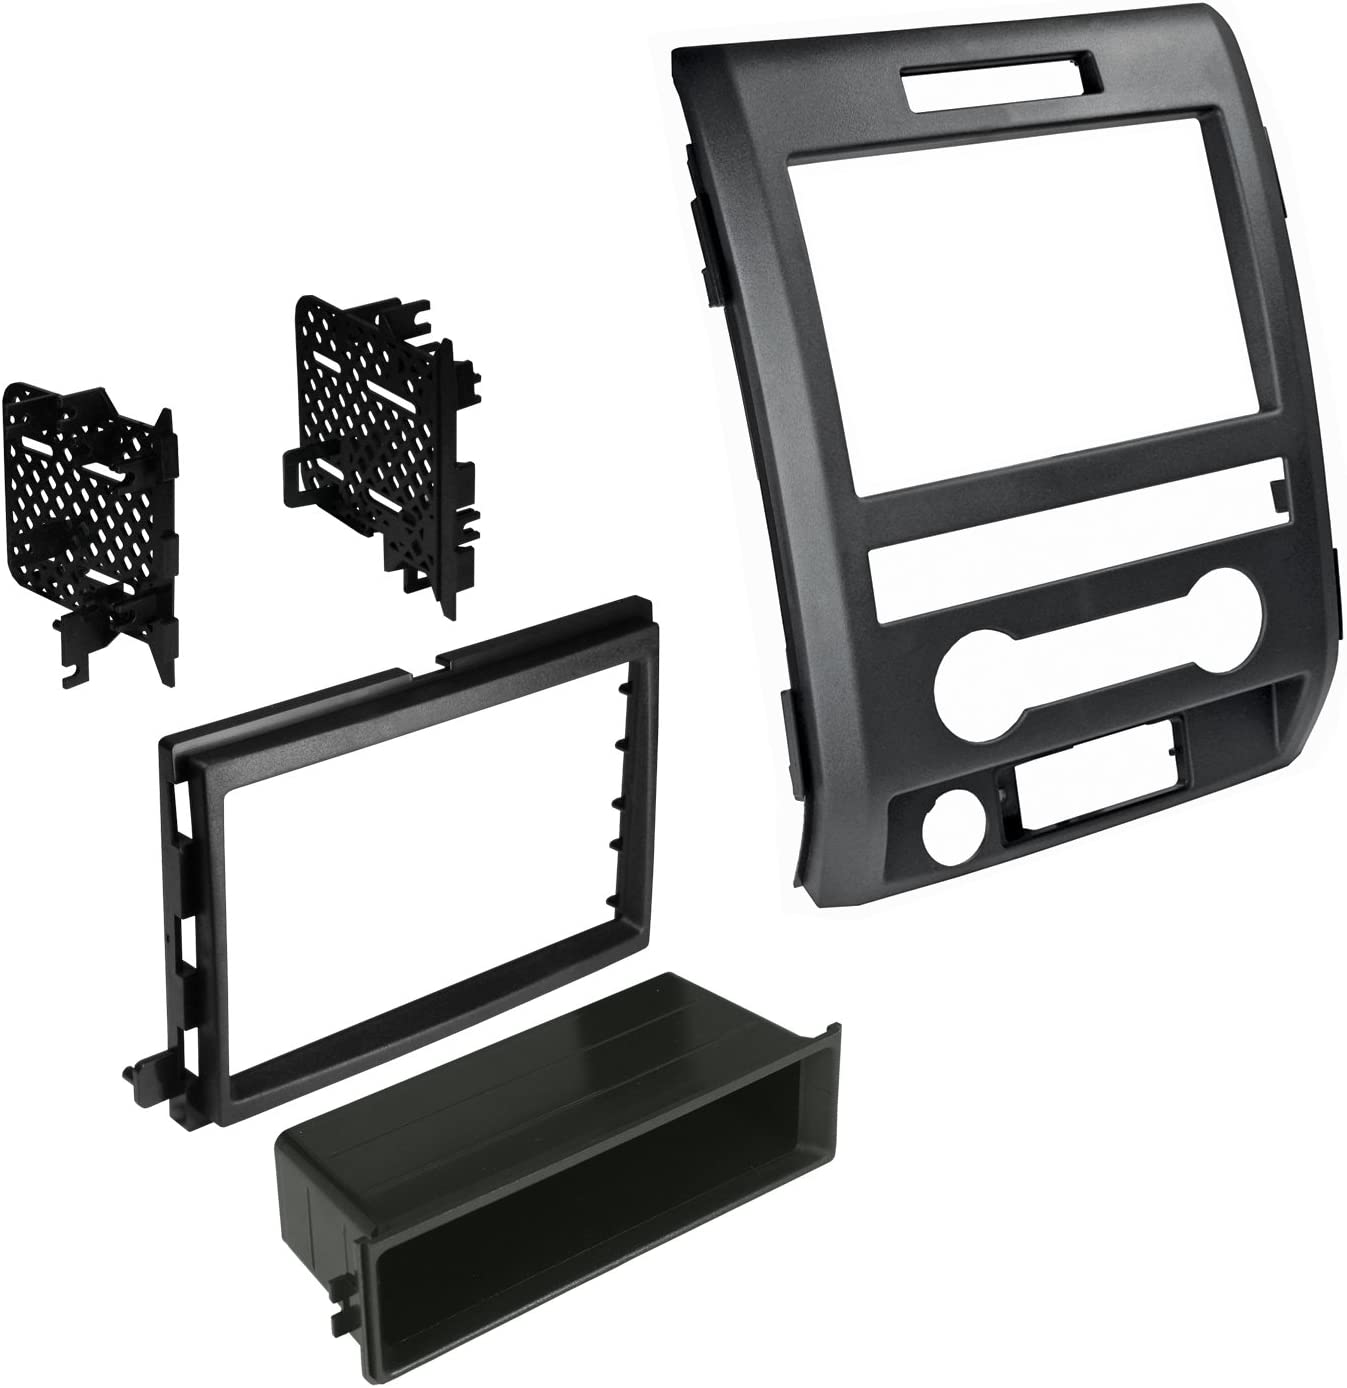 Aftermarket Car Install Dash Kit Compatible with Ford F-150 2009 2010 2011 2012